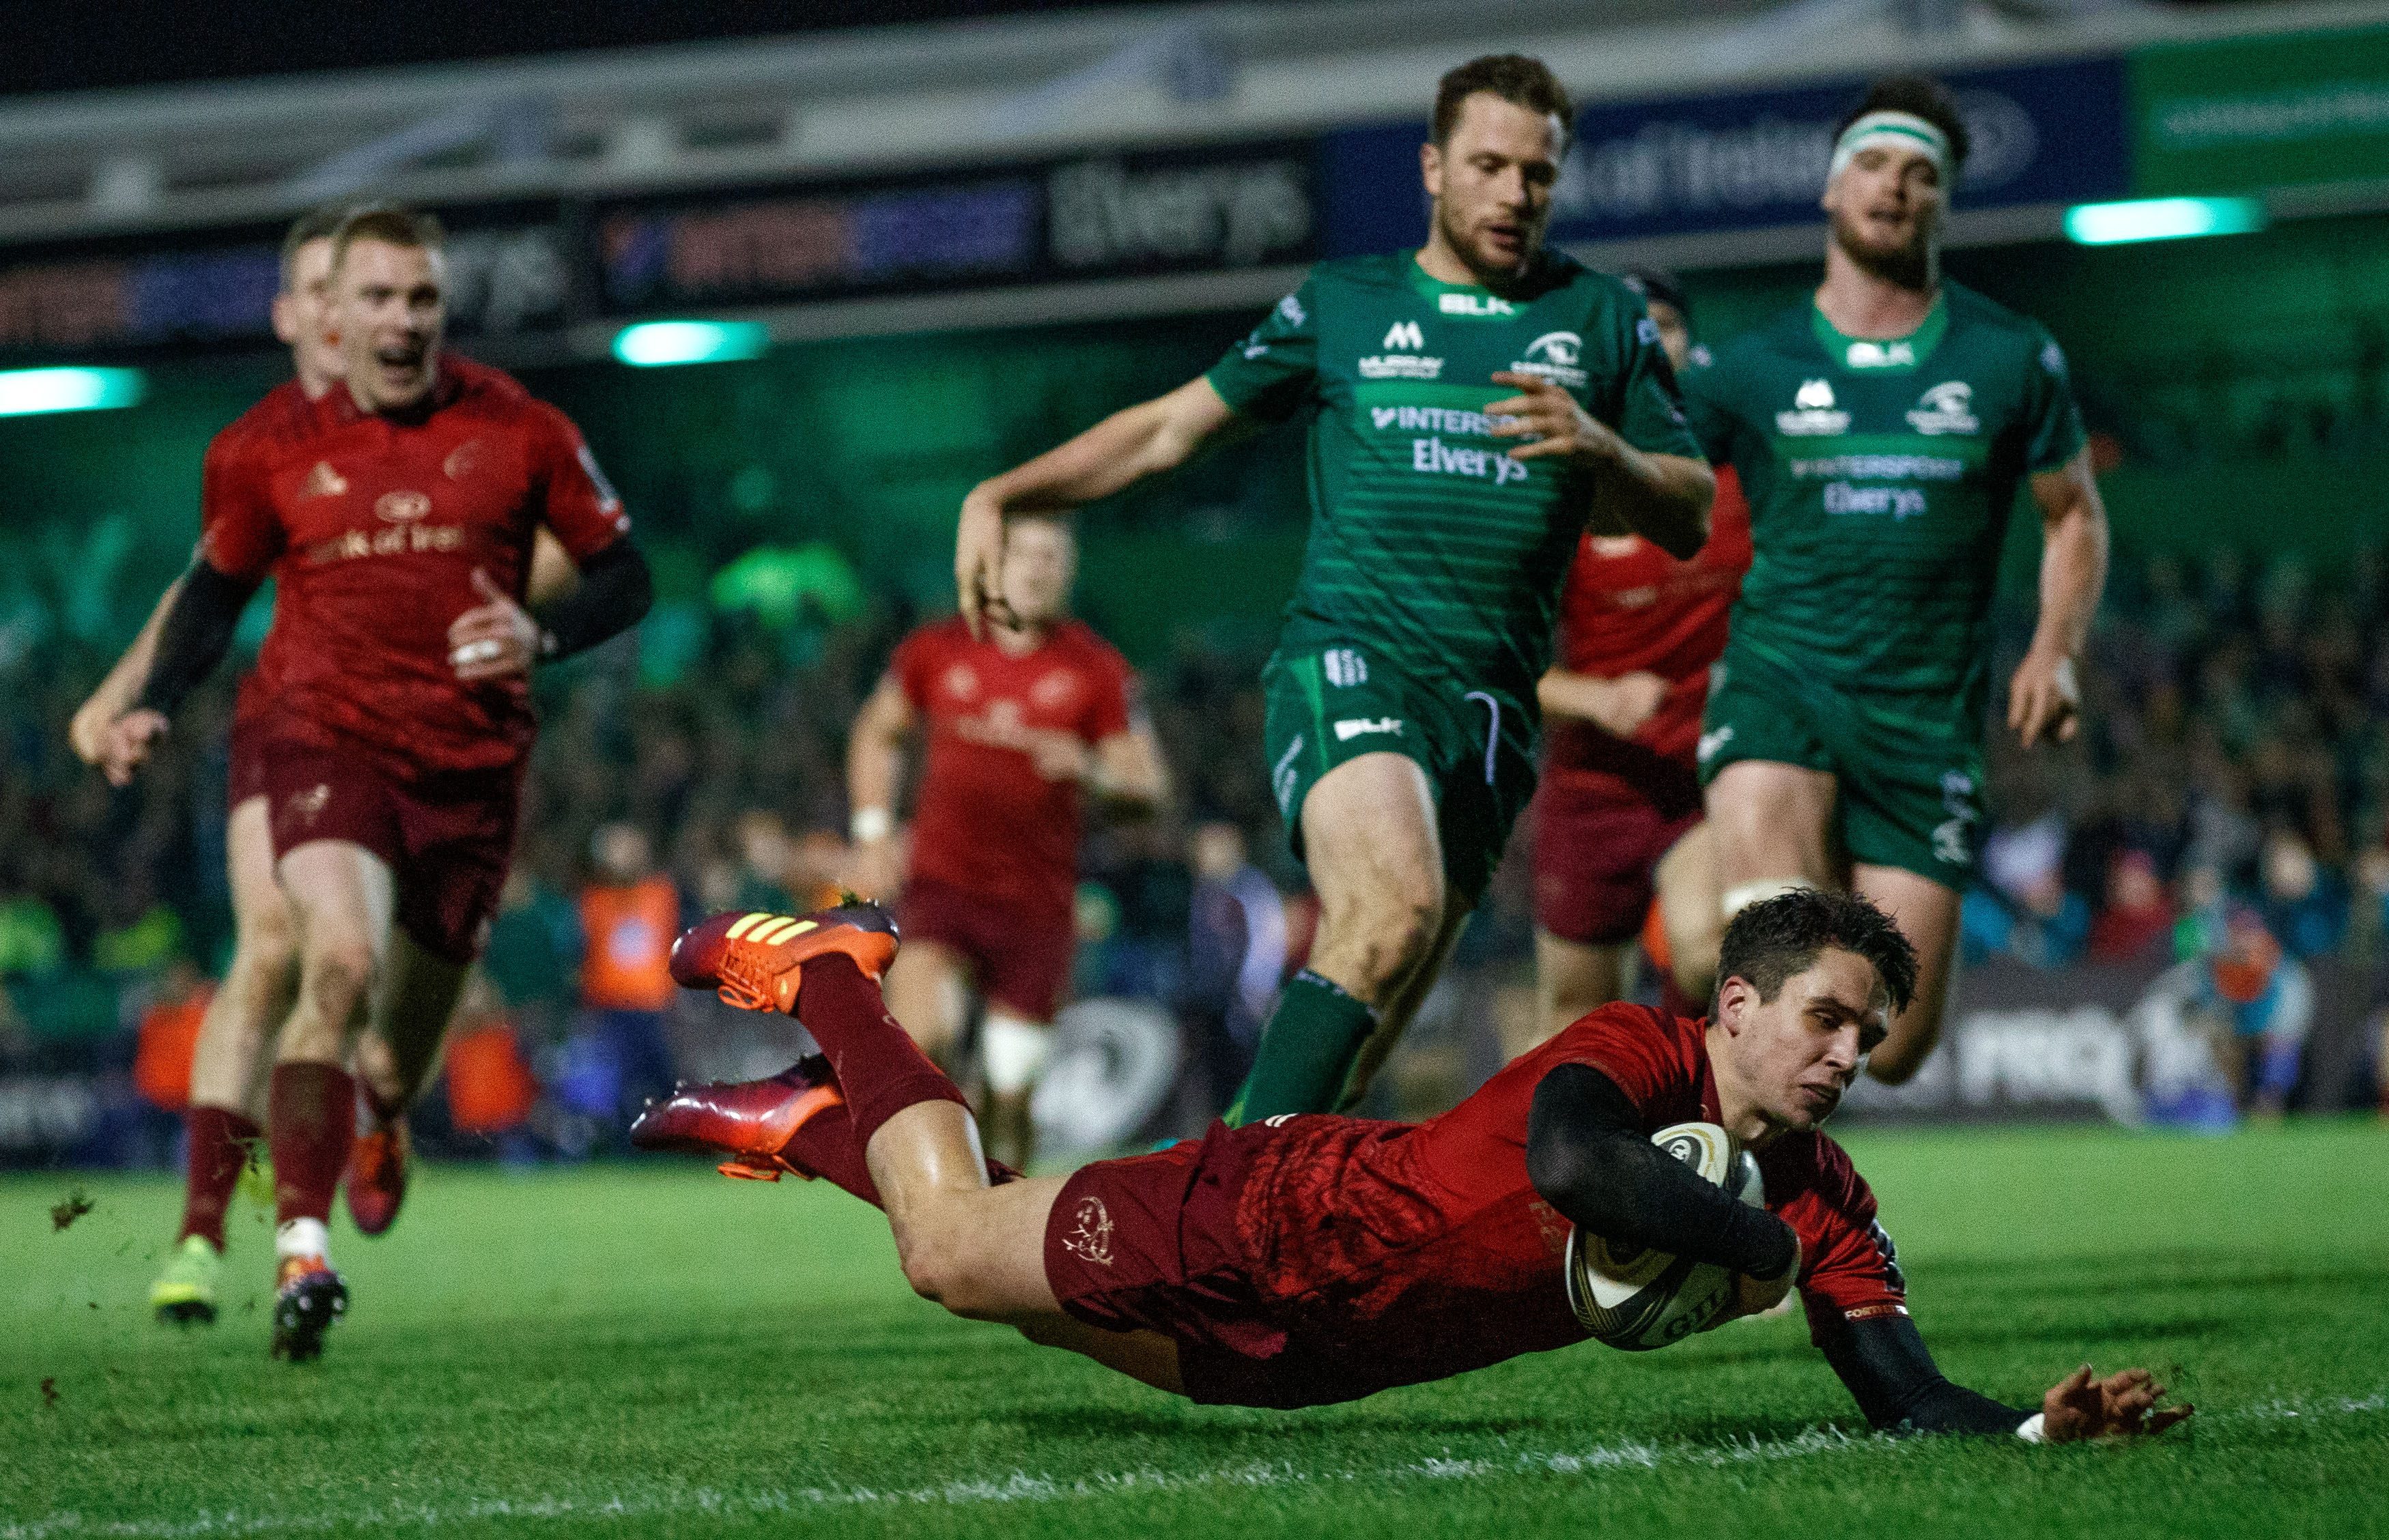 WATCH Munster move top of Conf A with bonus point win over Connacht